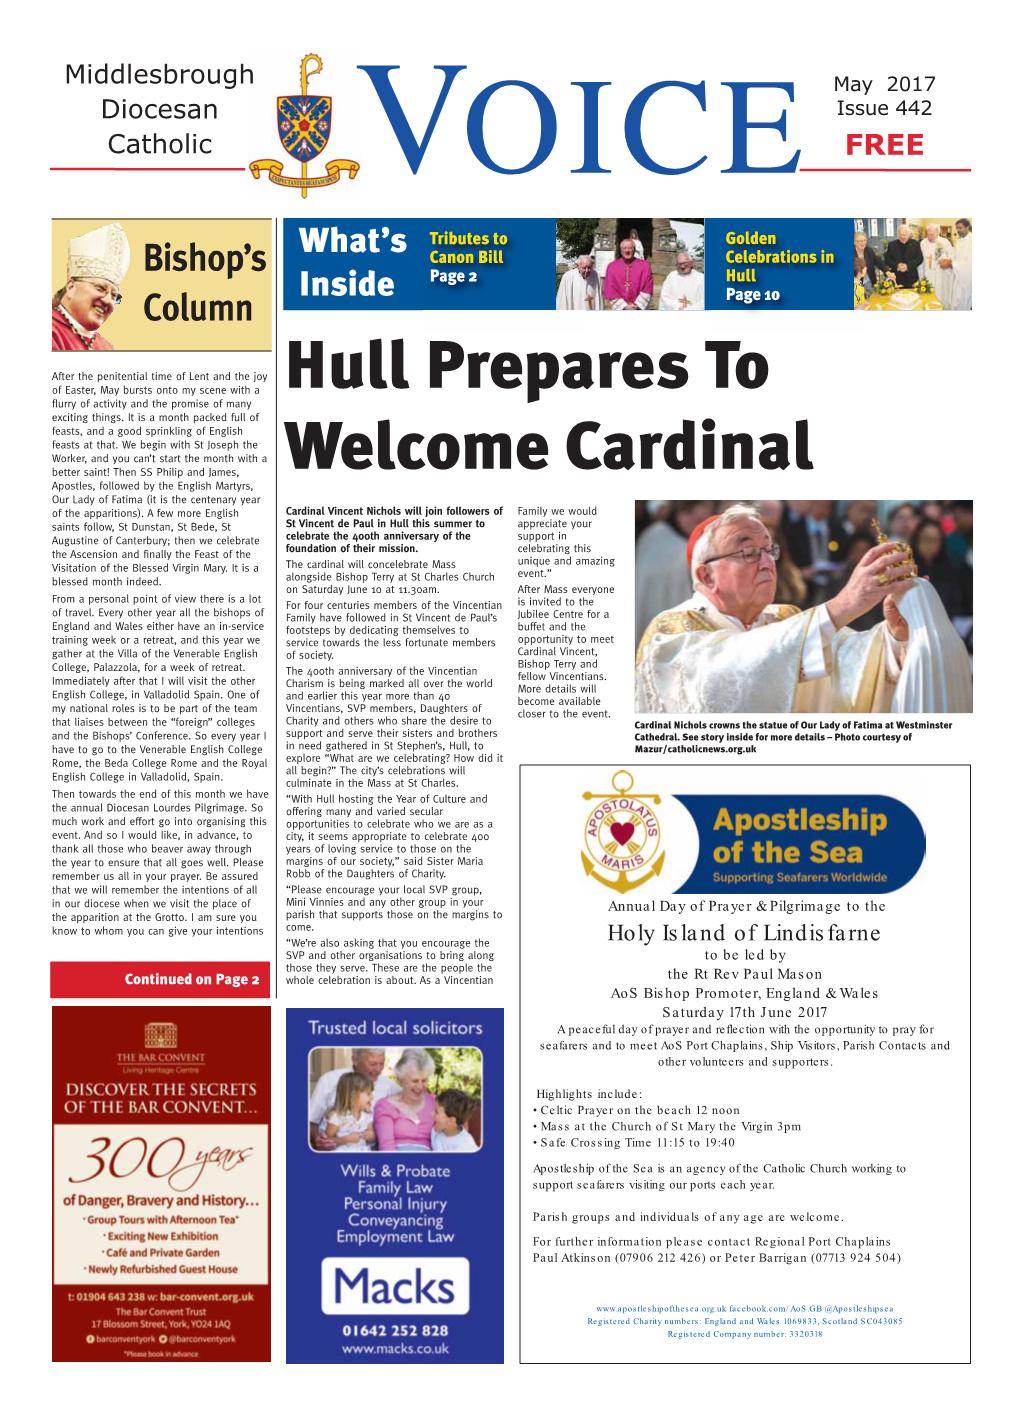 Hull Prepares to Welcome Cardinal